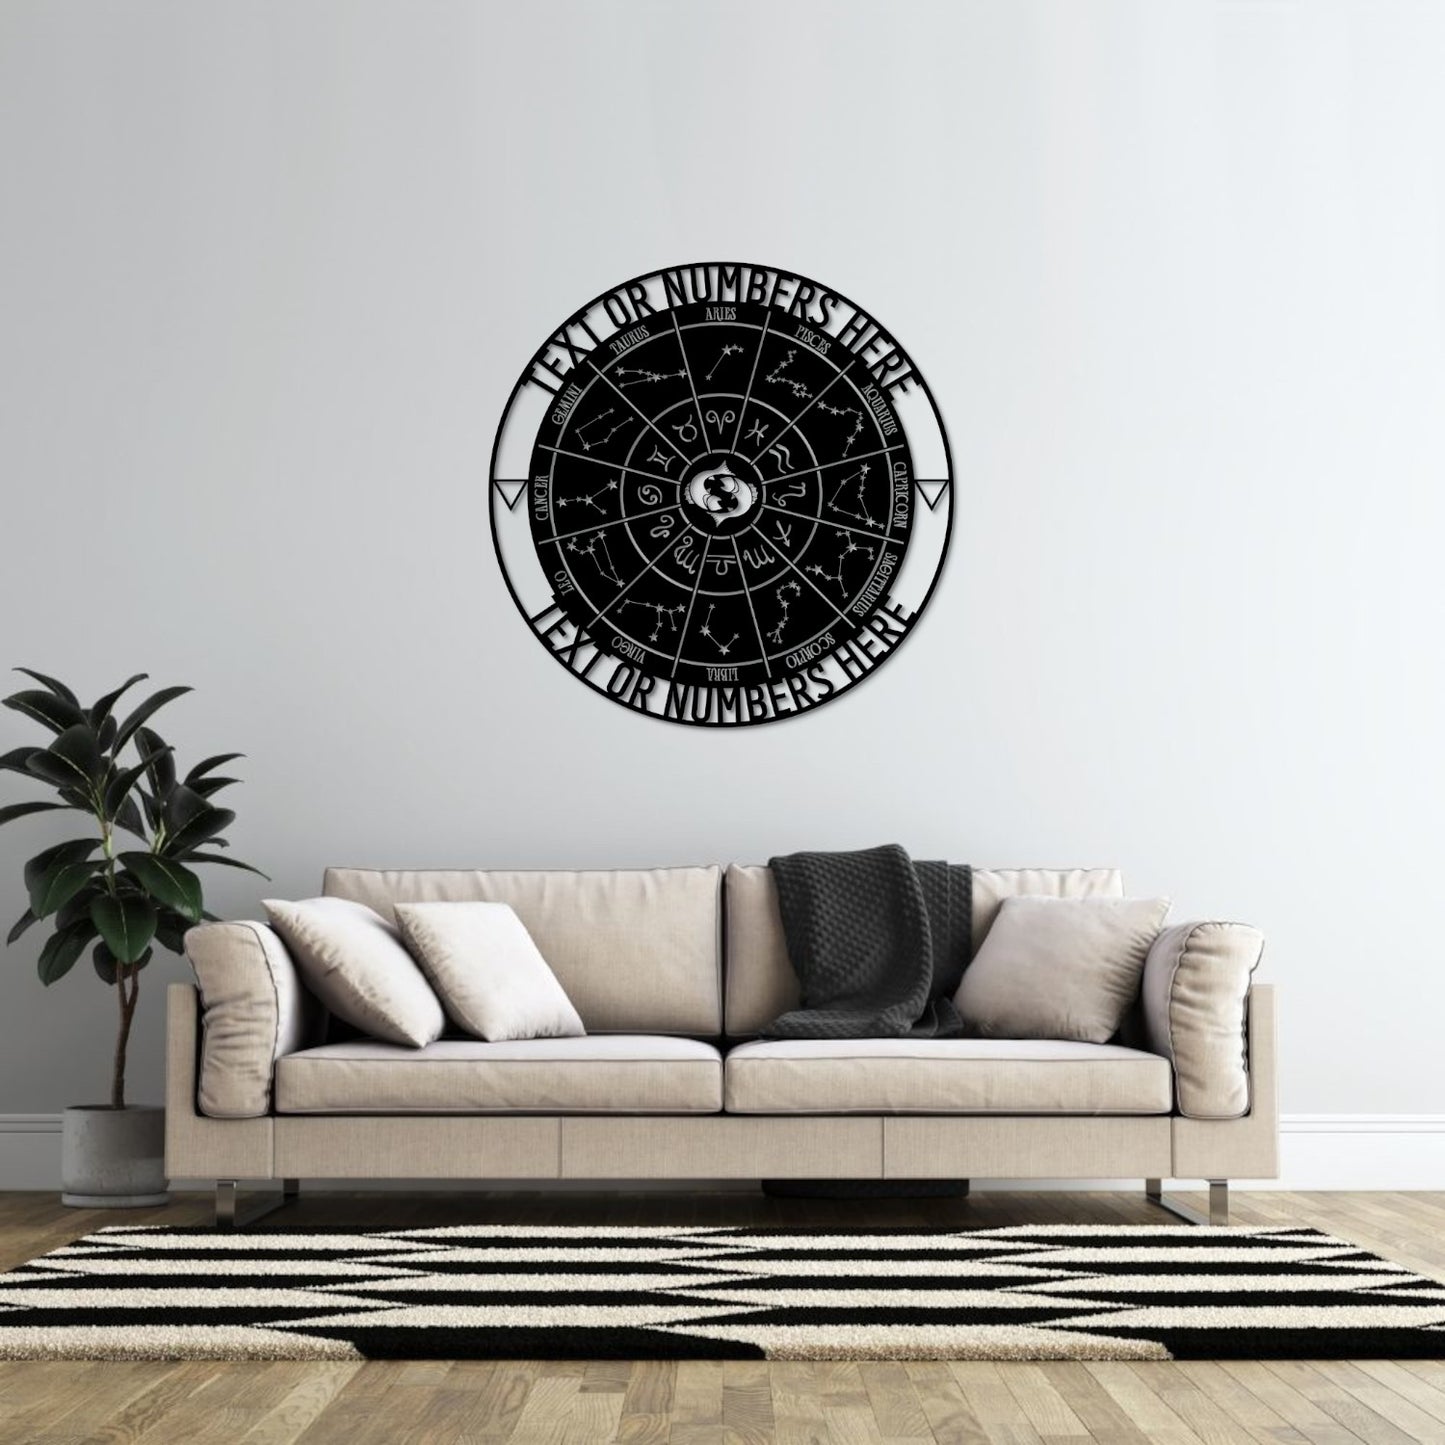 Personalized Pisces Zodiac Wheel Name Metal Sign Gift. Custom Astrology Wall Art Decor. Celestial Gifts. Decorative Pisces Star Sign Hanging